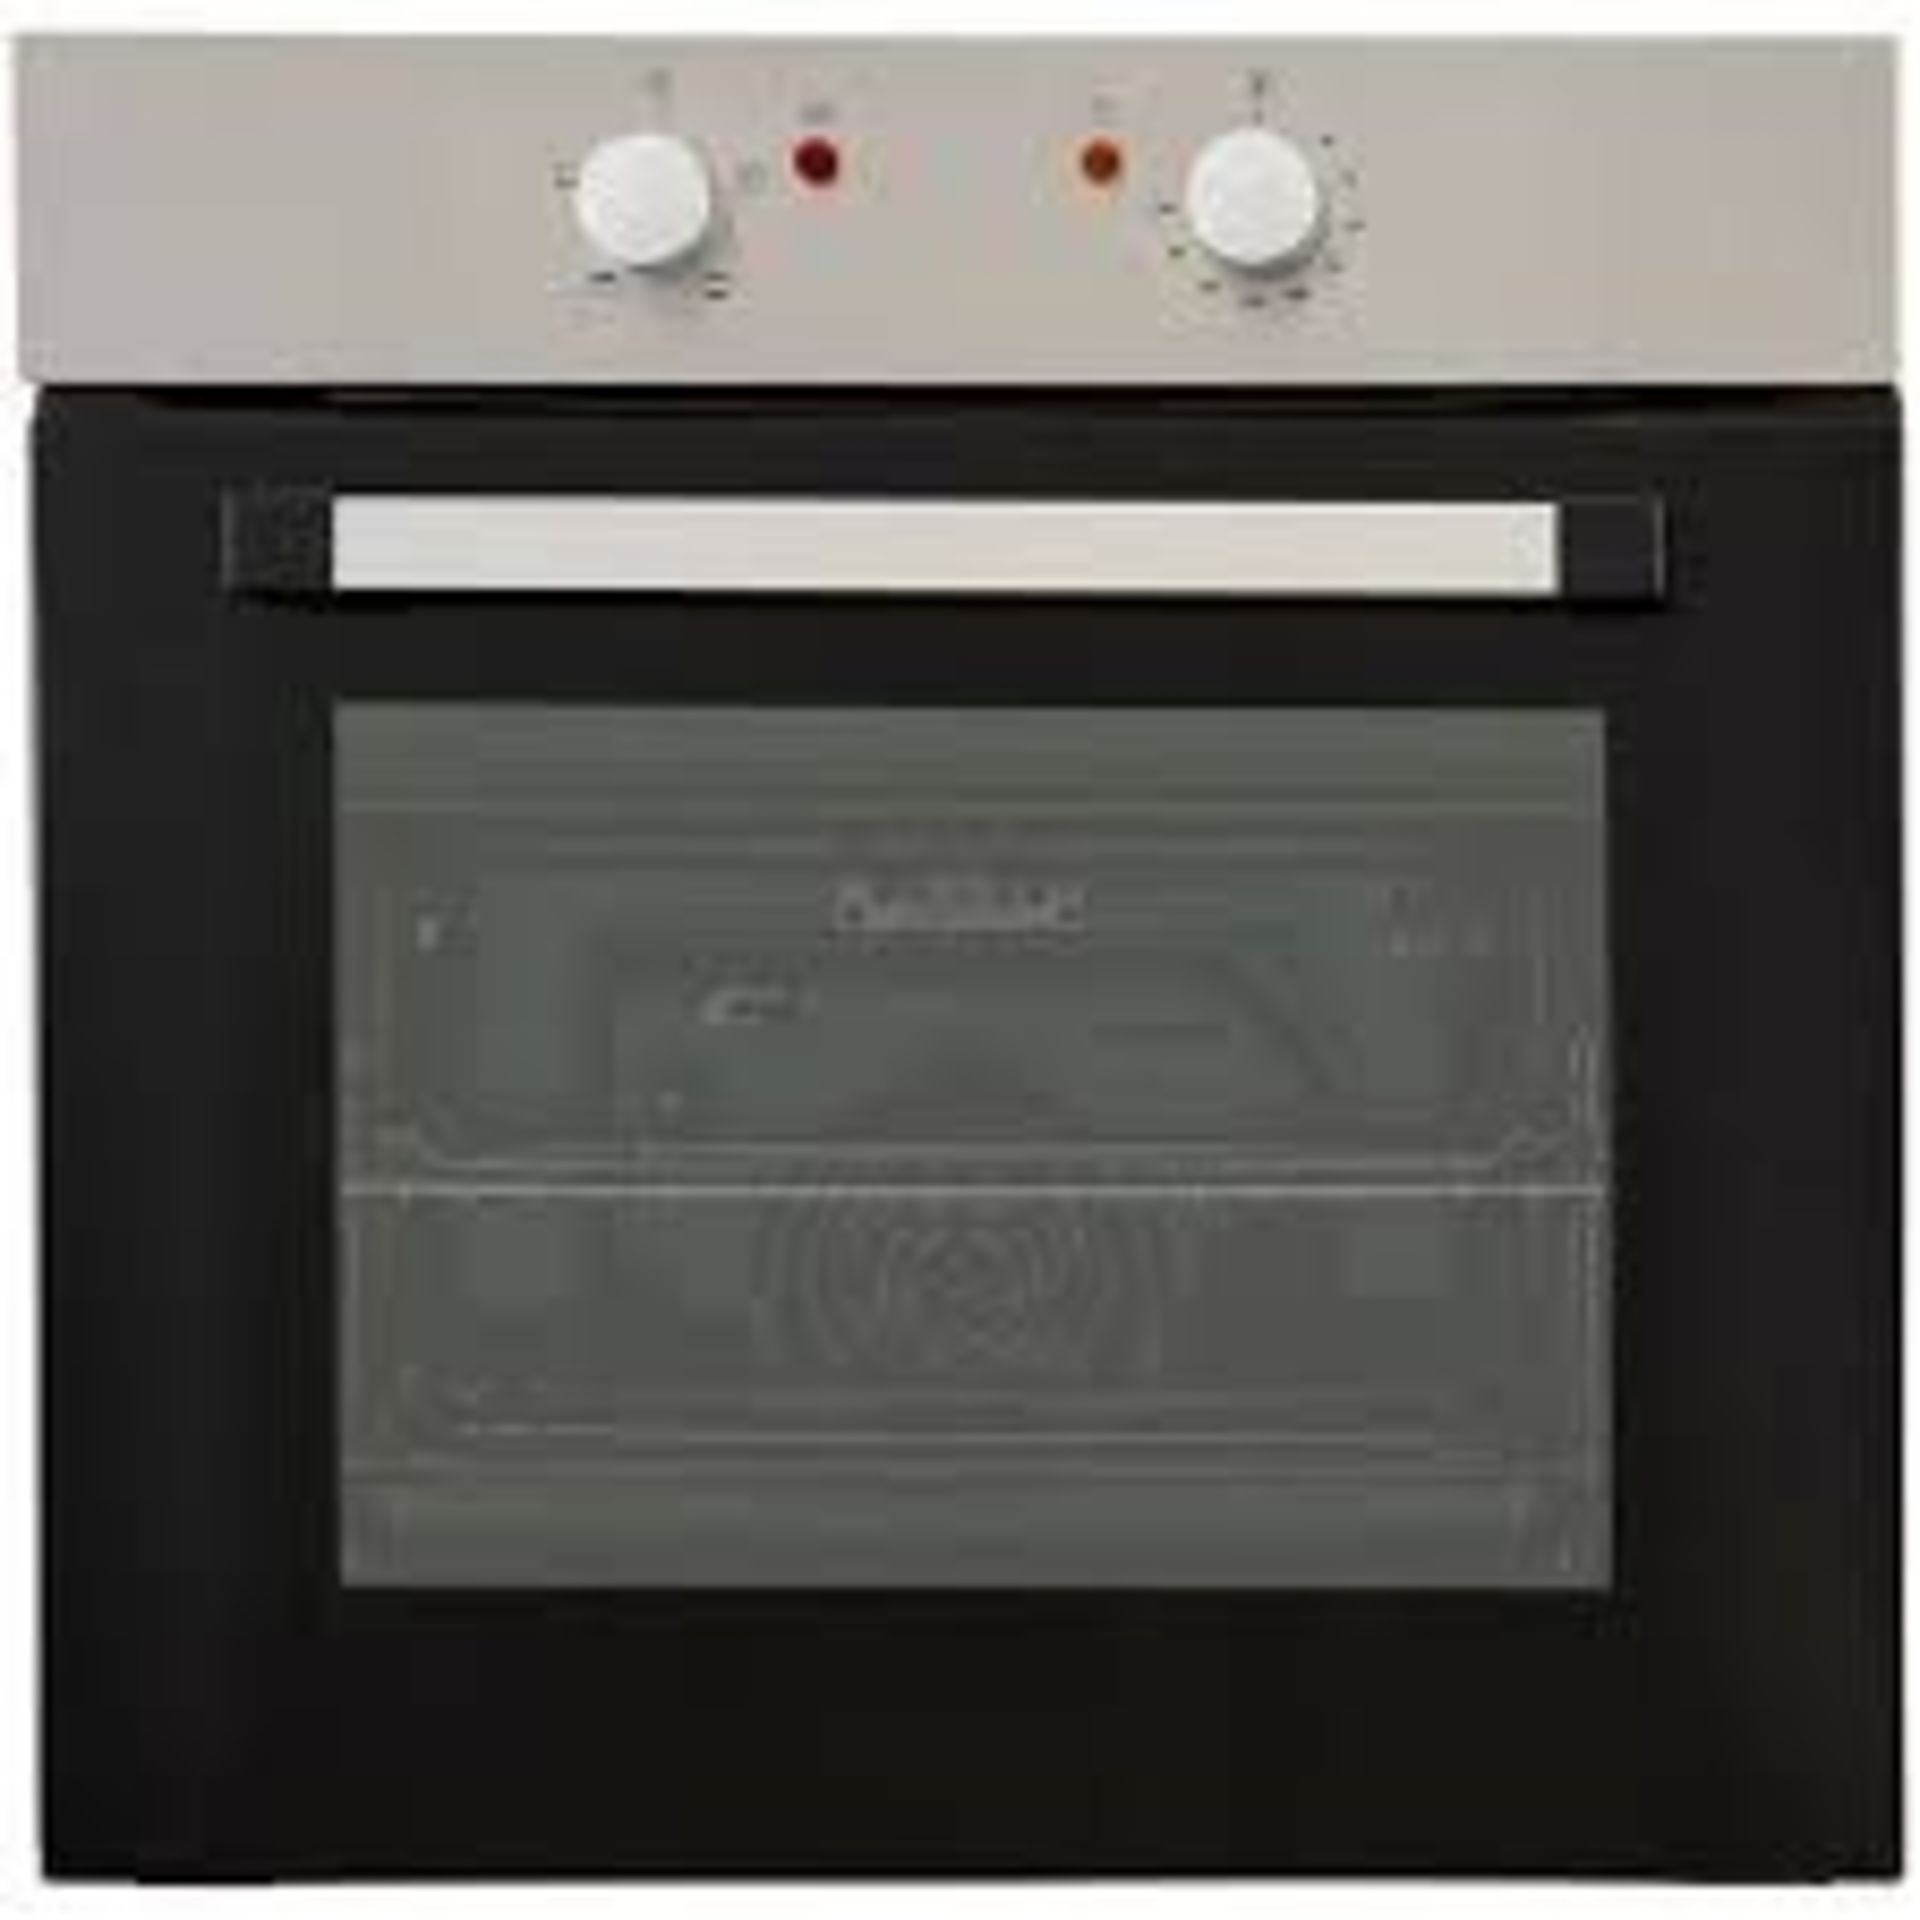 CSB60A Built-in Single Conventional Oven - Chrome effect. - ER40. This conventional, single oven has